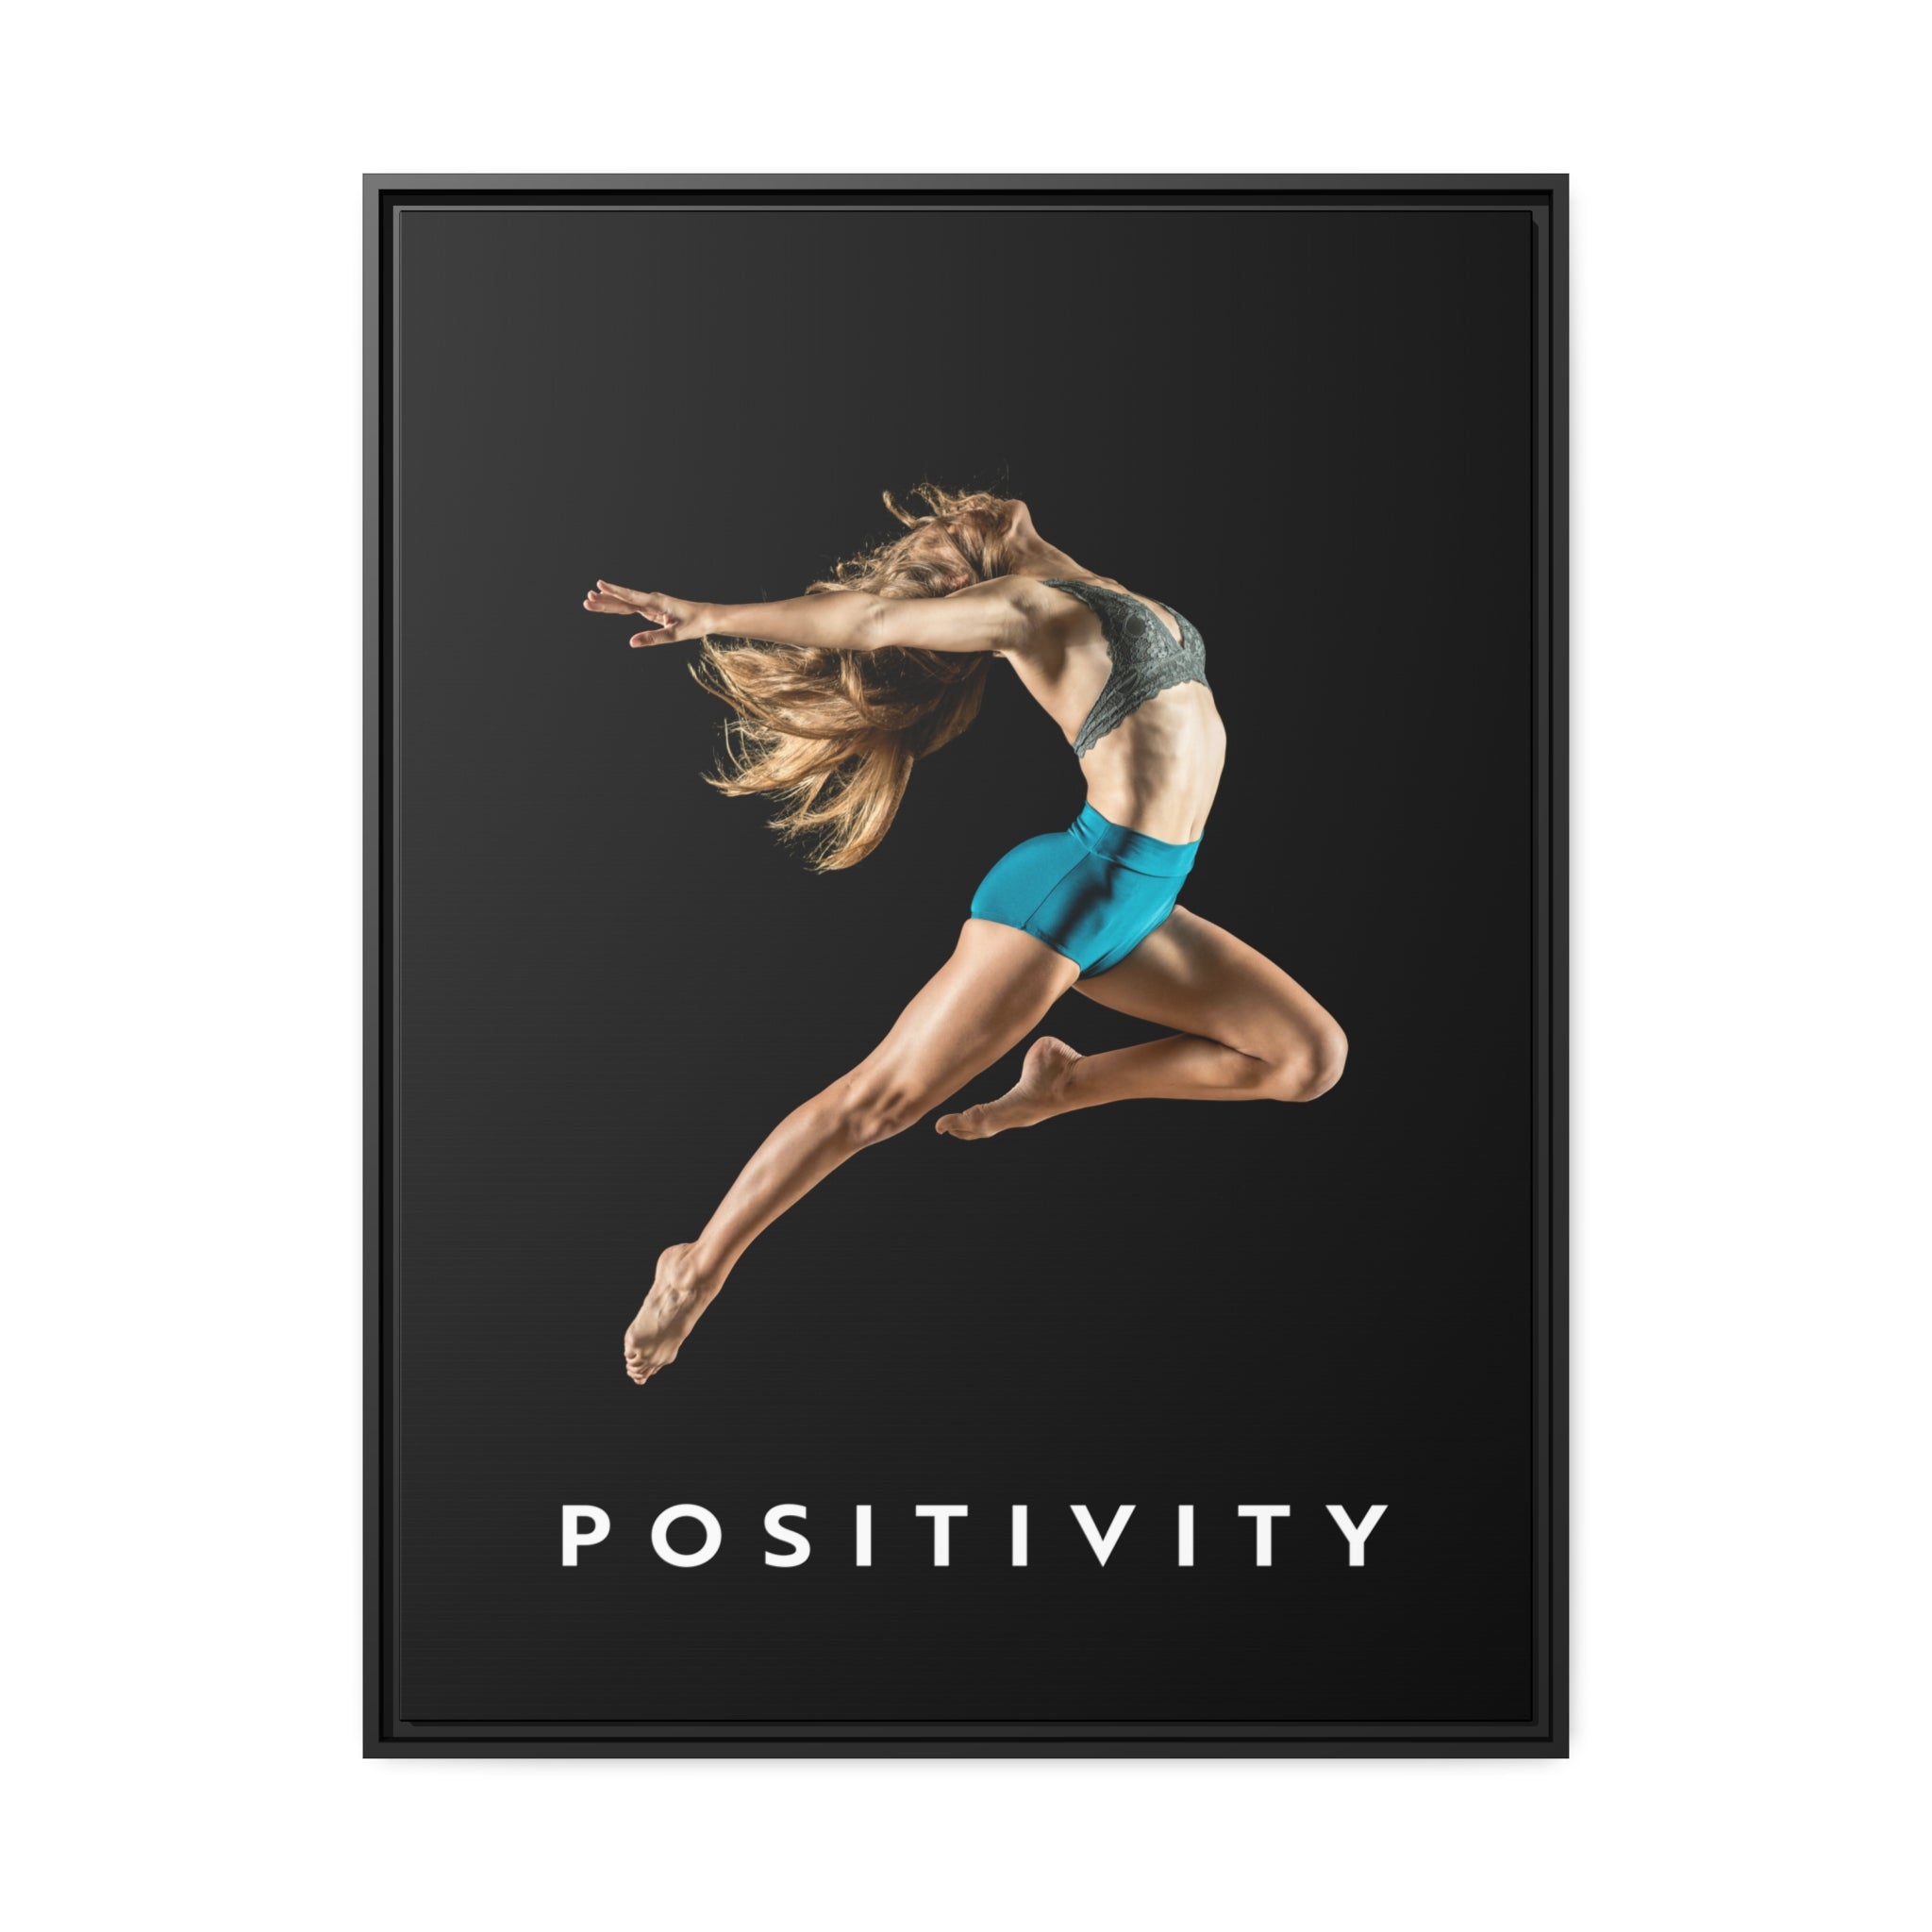 Positivity - Airborne - Wall Art additional image 4